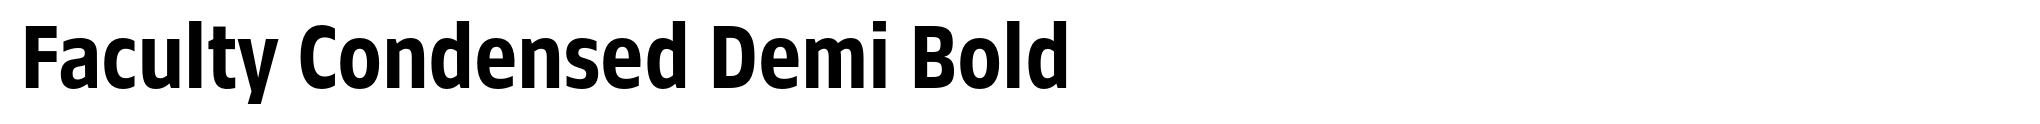 Faculty Condensed Demi Bold image